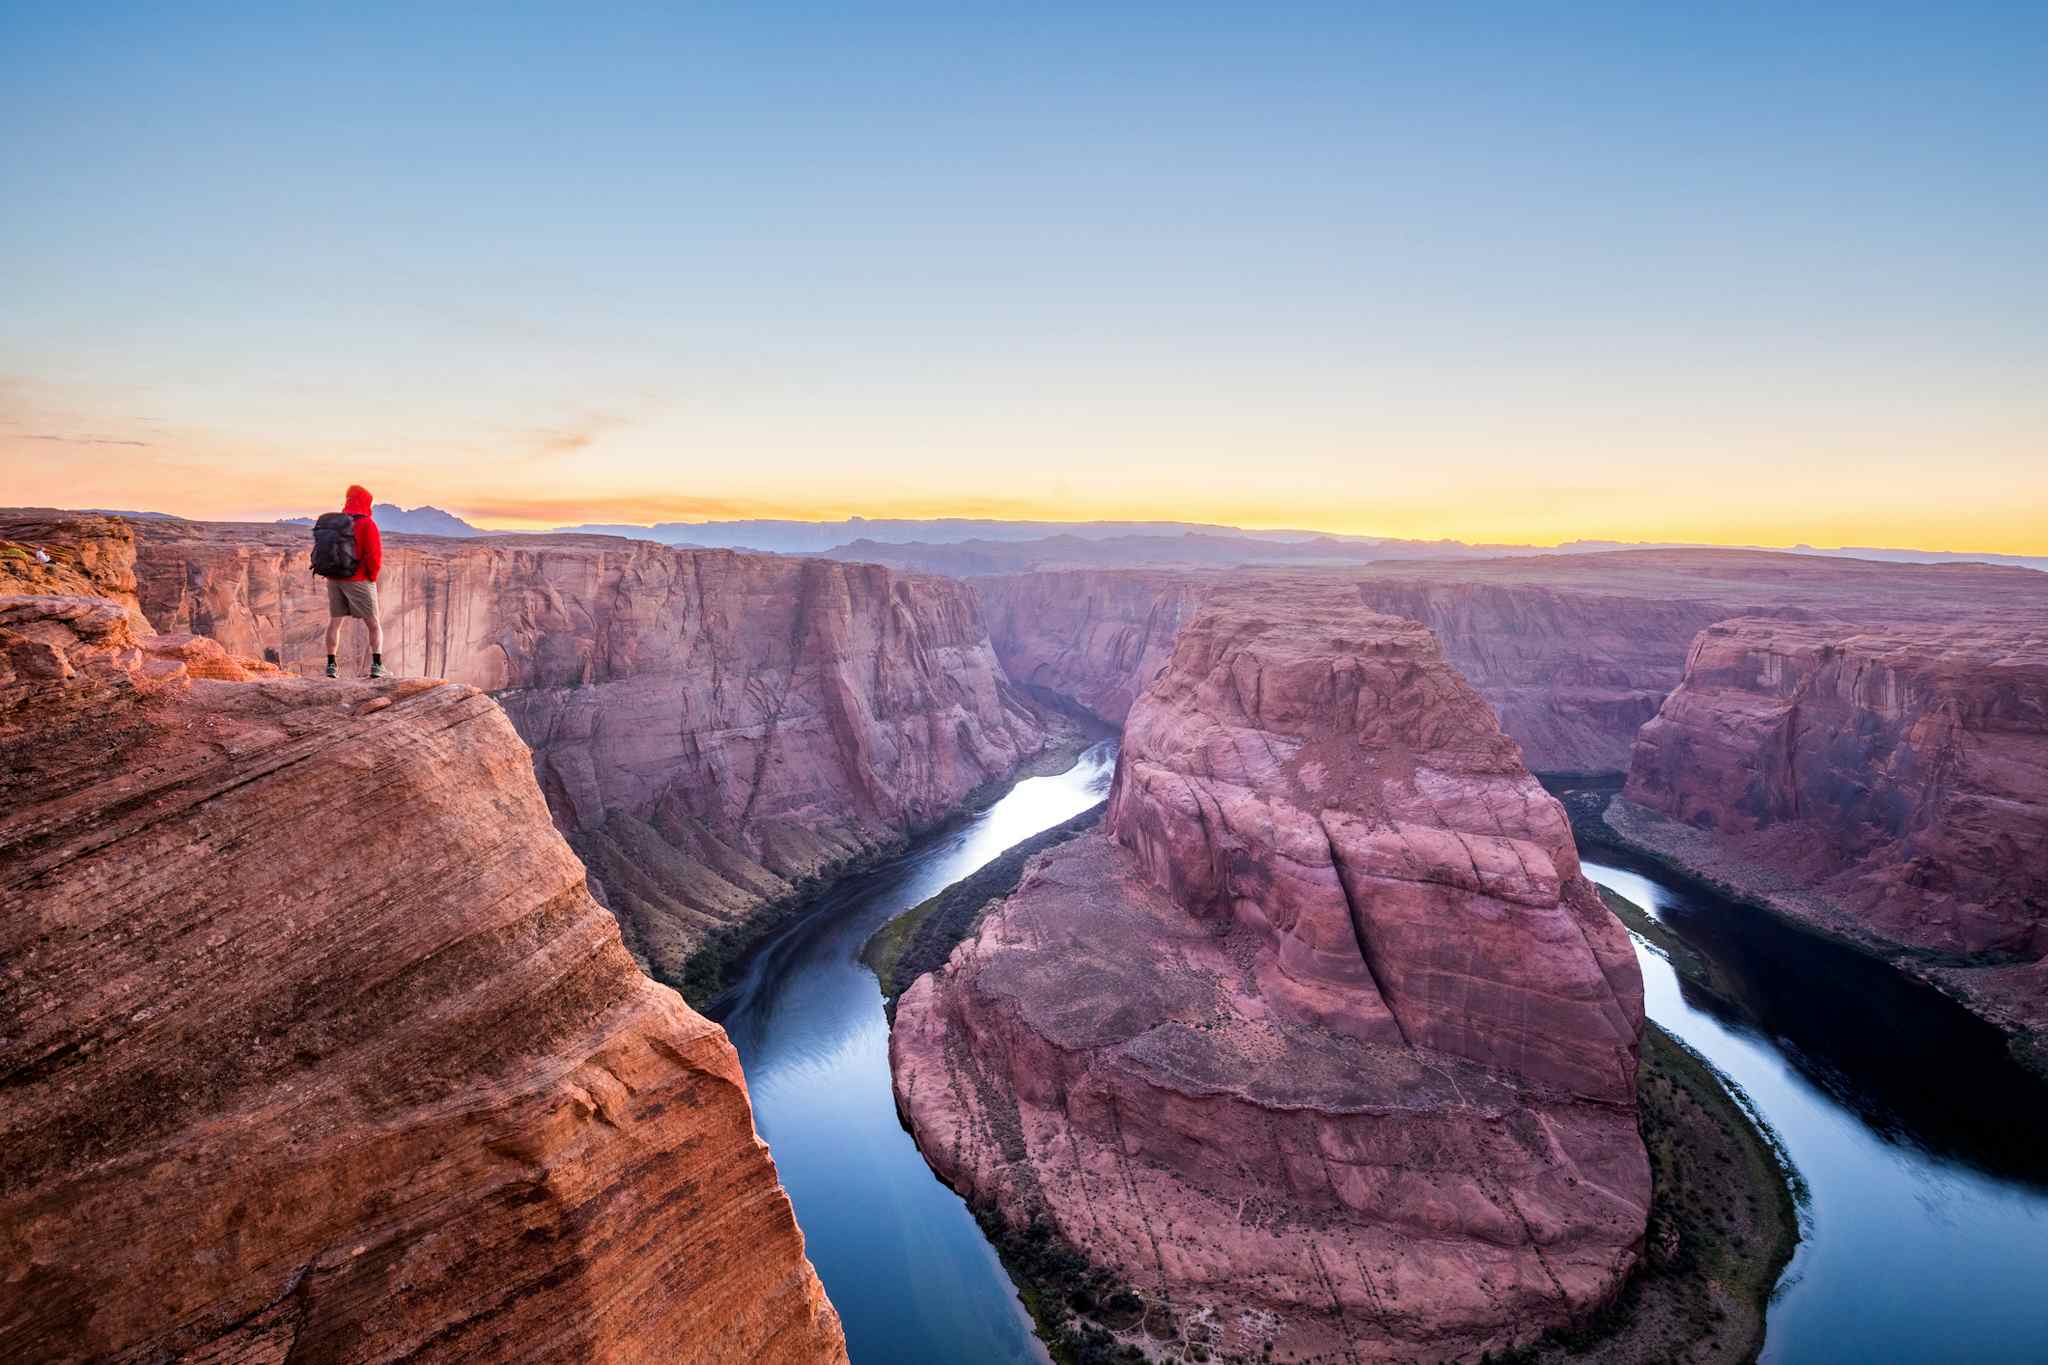 A male hiker is standing on steep cliffs enjoying the beautiful view of Colorado river flowing at famous Horseshoe Bend overlook in beautiful post sunset twilight on a summer evening, Arizona, USA

Getty: 683652564
